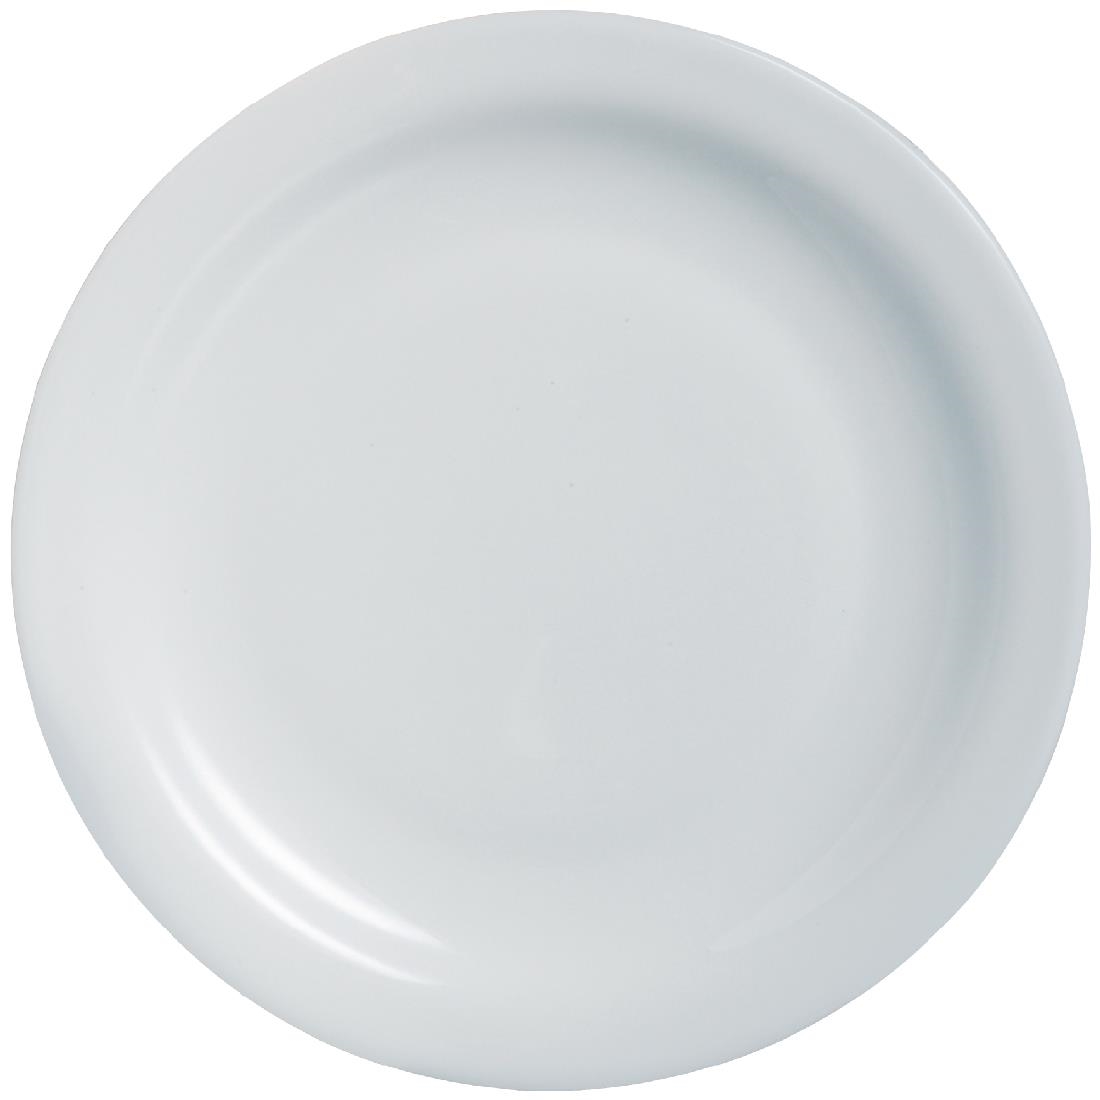 Arcoroc Opal Hoteliere Narrow Rim Plates 236mm (Pack of 6)